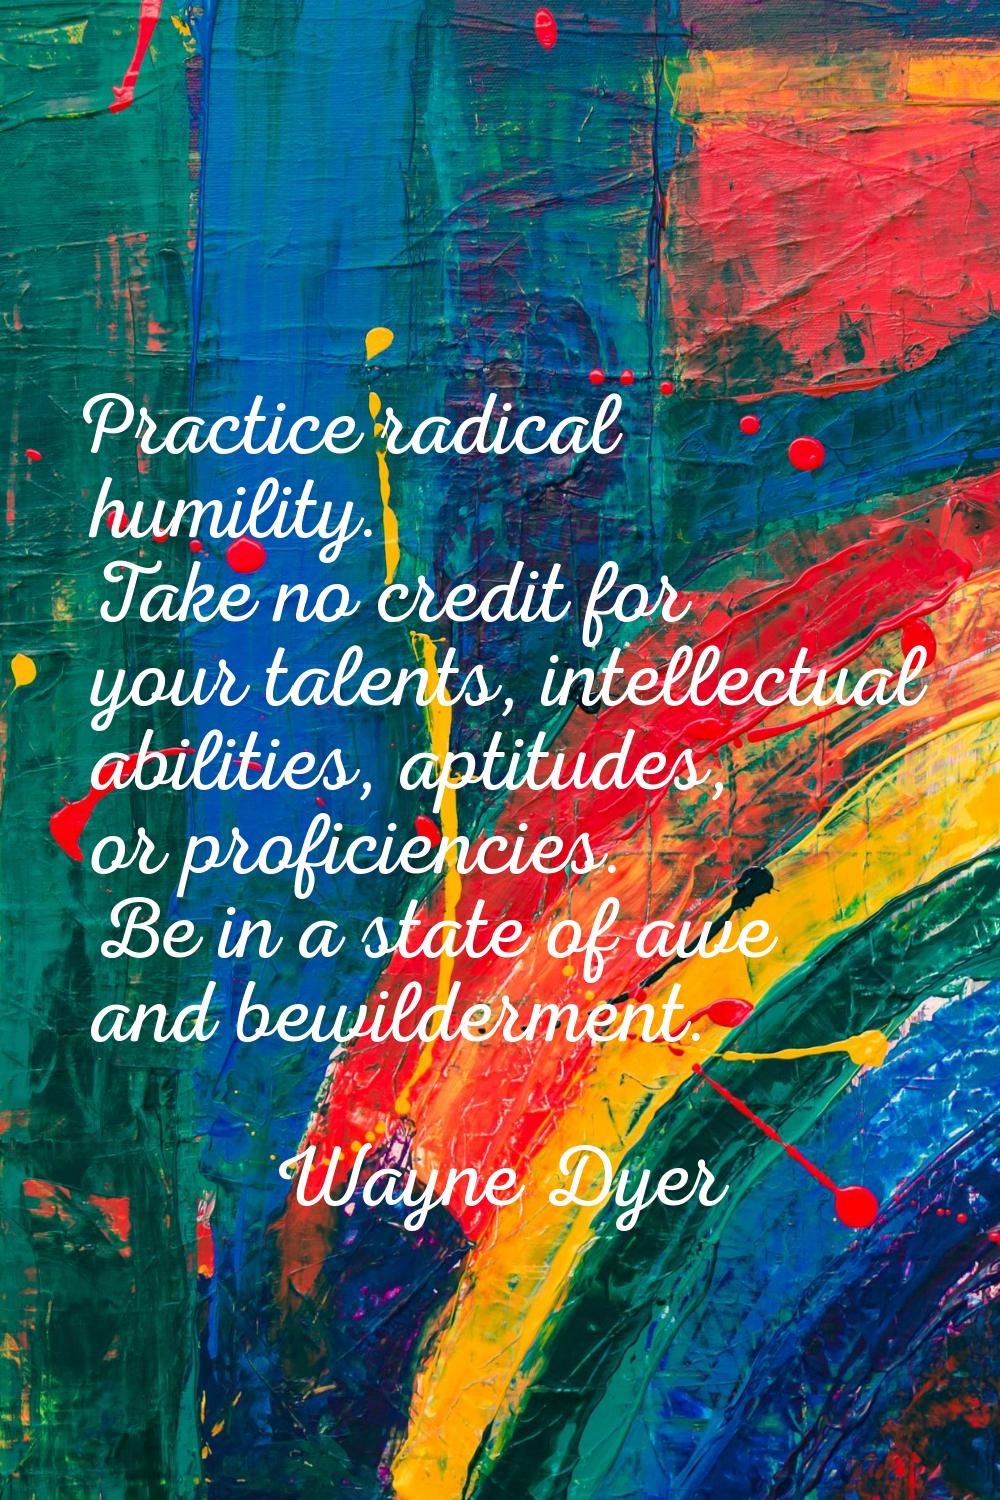 Practice radical humility. Take no credit for your talents, intellectual abilities, aptitudes, or p